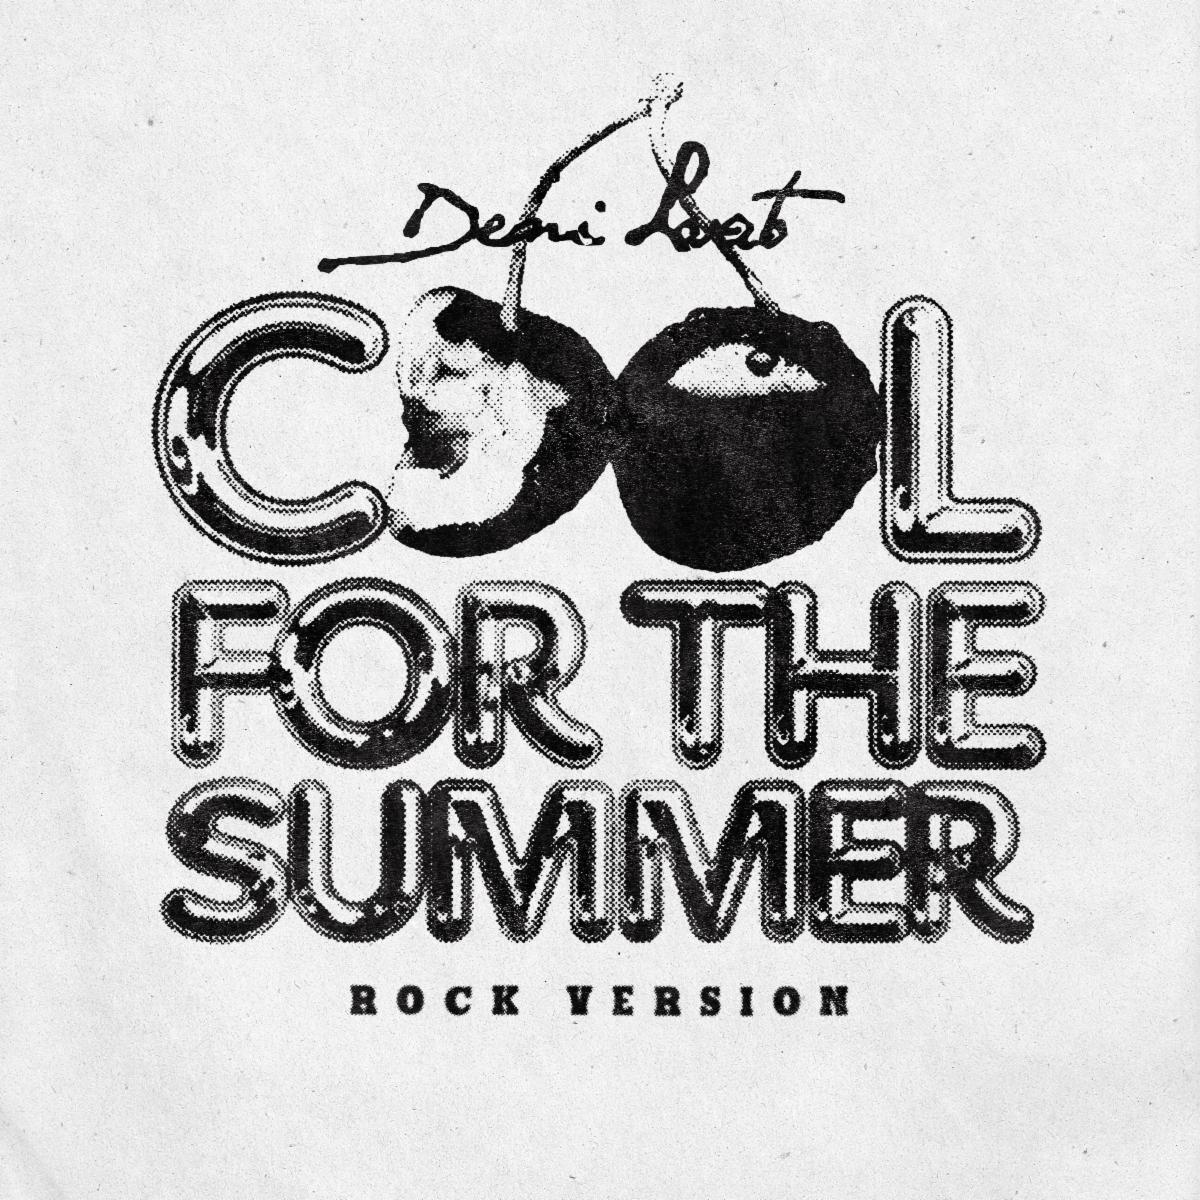 DEMI LOVATO RELEASES “COOL FOR THE SUMMER (ROCK VERSION)”